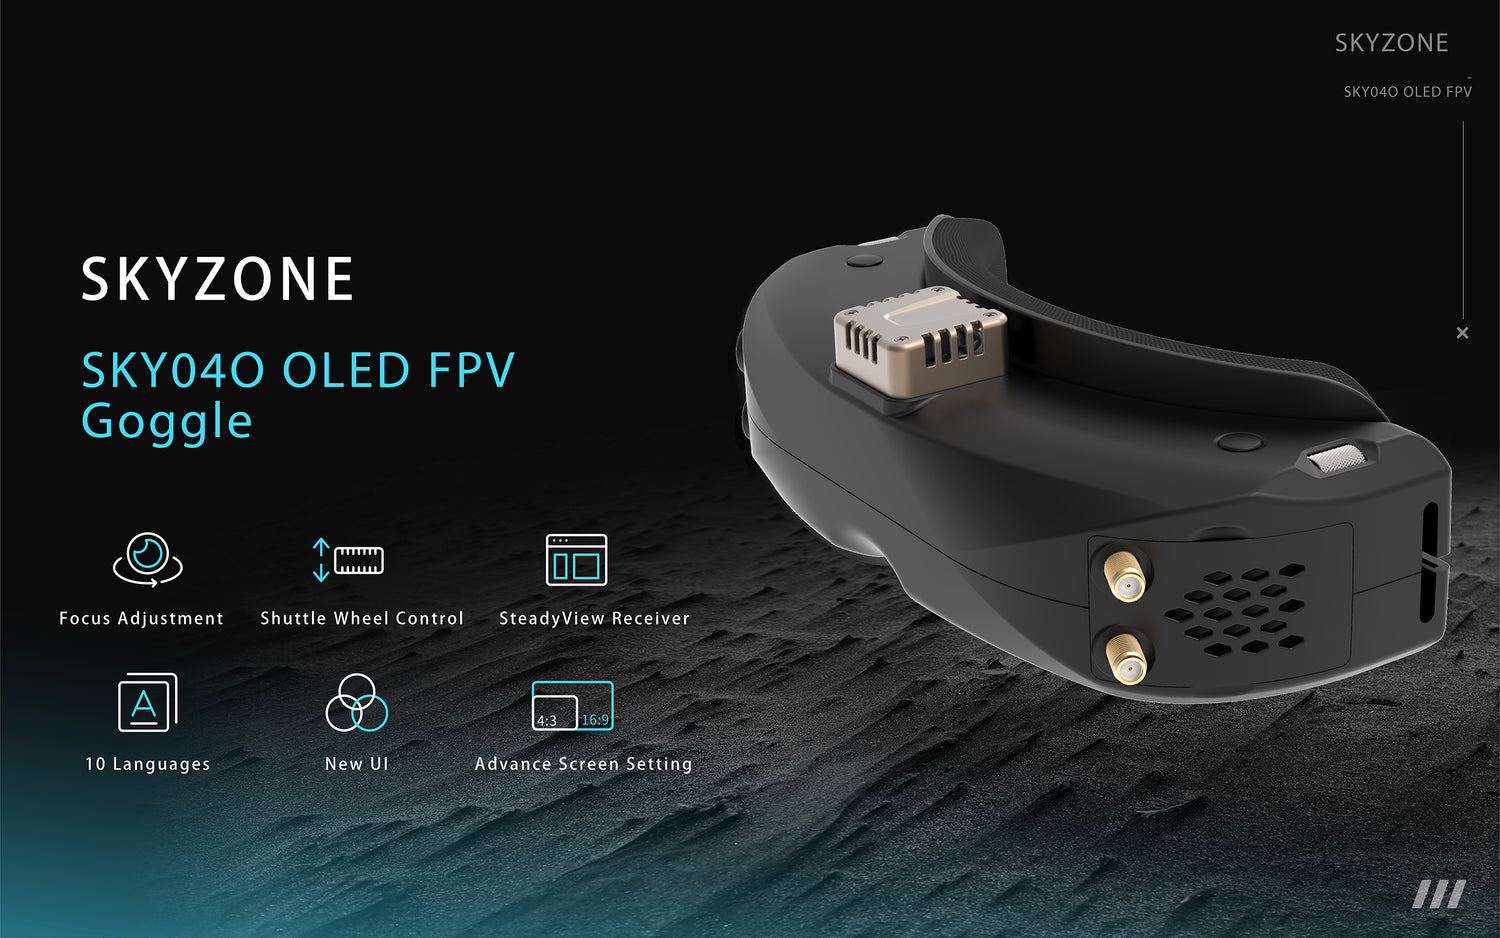 SKYZONE SKY04O FPV Goggle with OLED Screen and 60FPS DVR Steadyview Receiver